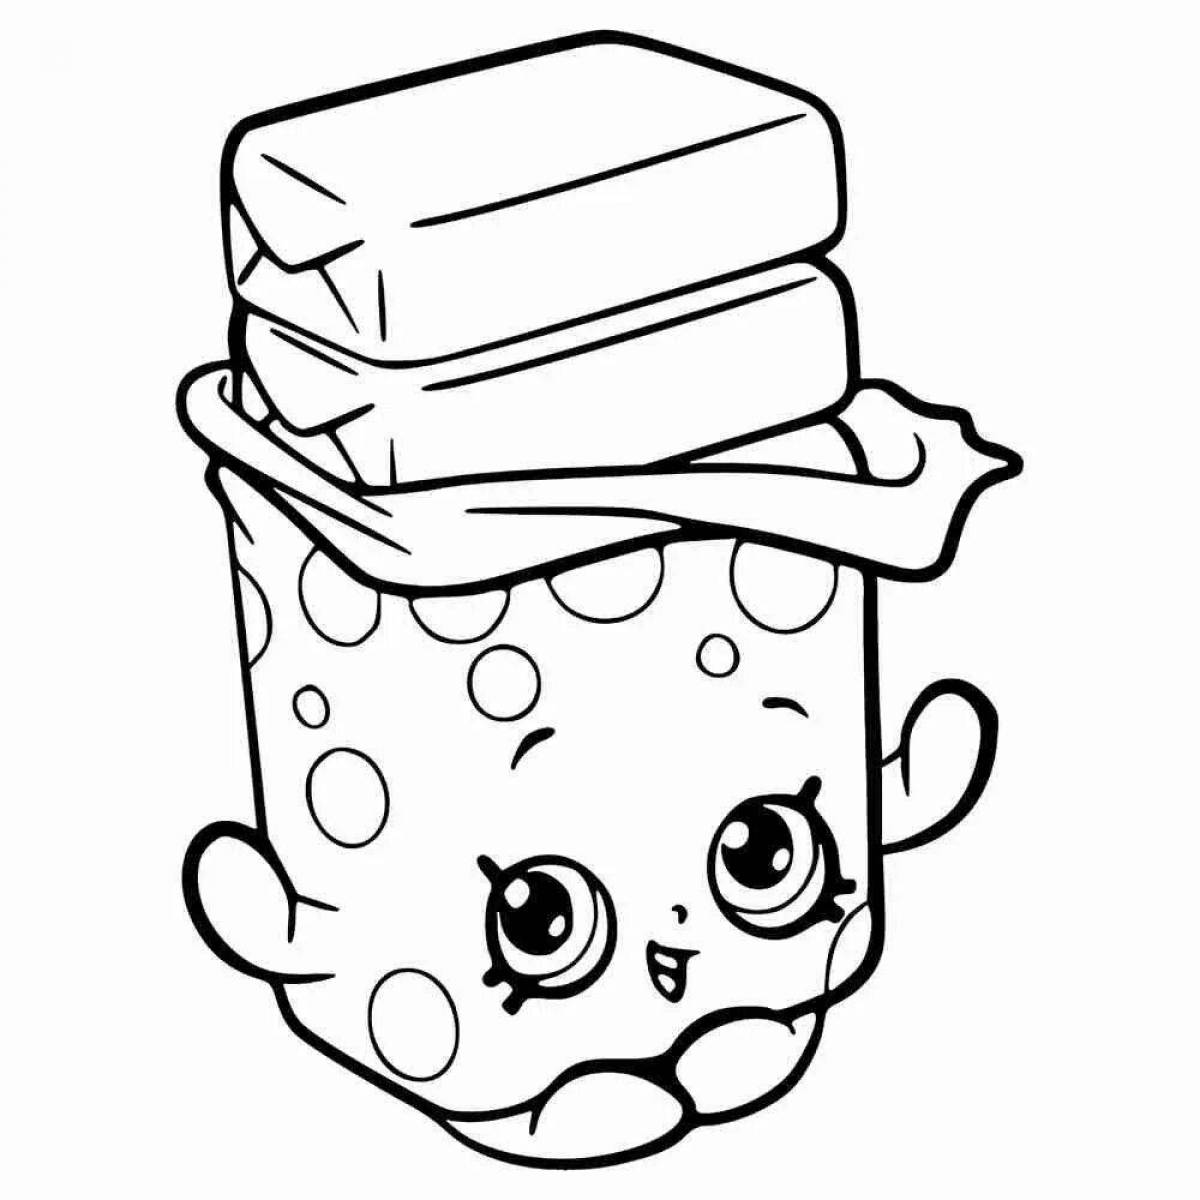 Delicious soft food coloring page